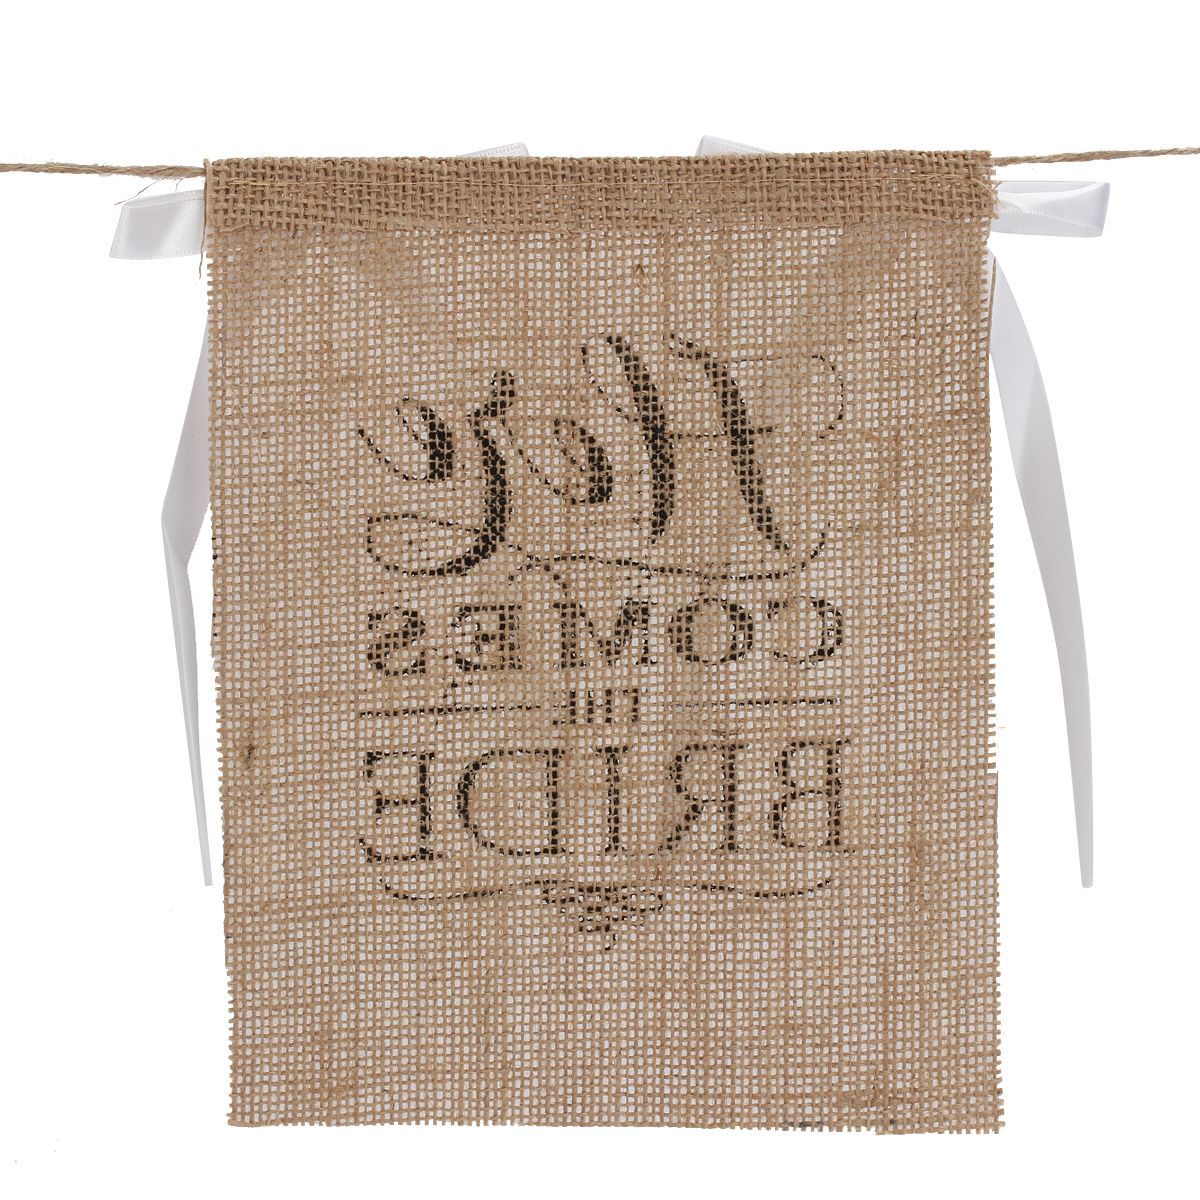 Here-Comes-the-Bride-Wedding-Banner-Party-Burlap-Bunting-Garland-Photo-Booth-Decorations-1405994